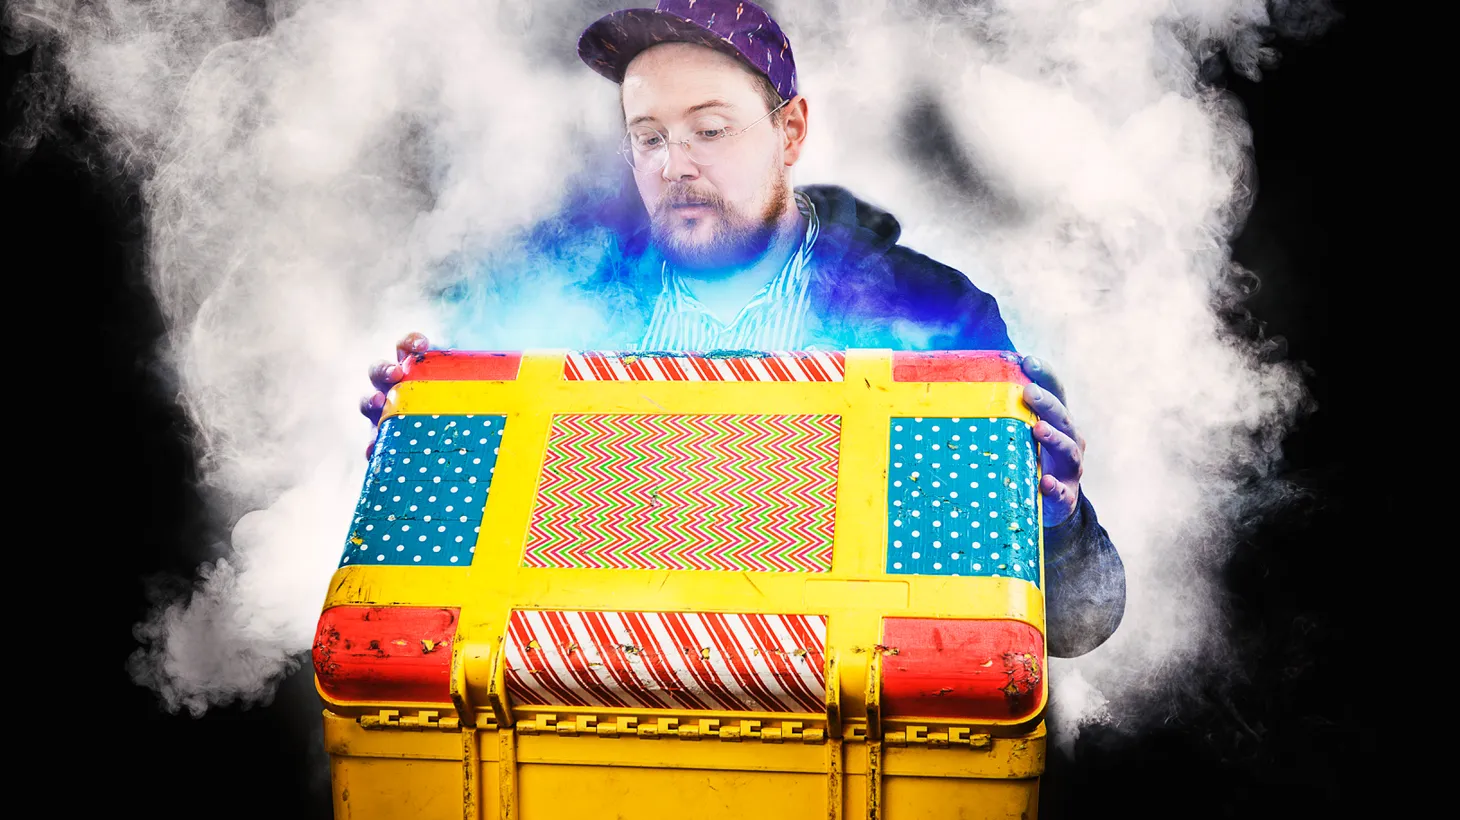 Baltimore experimental pop artist Dan Deacon spent the past year opening for Arcade Fire on their North American arena tour. His electronic wizardry was known to many before that high profile gig.